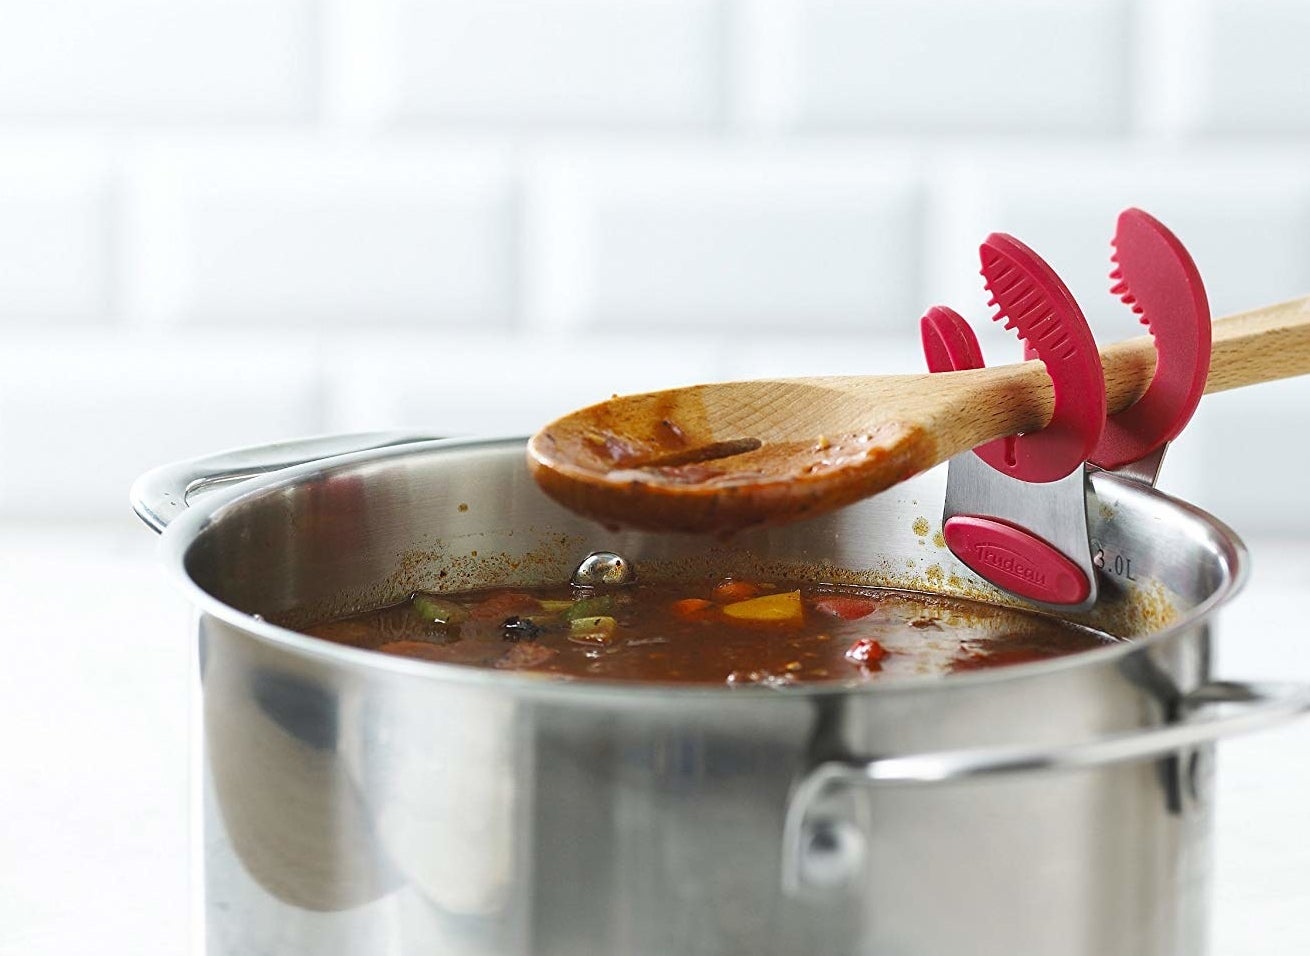 The clips holding a wooden spoon over a pot of sauce or soup